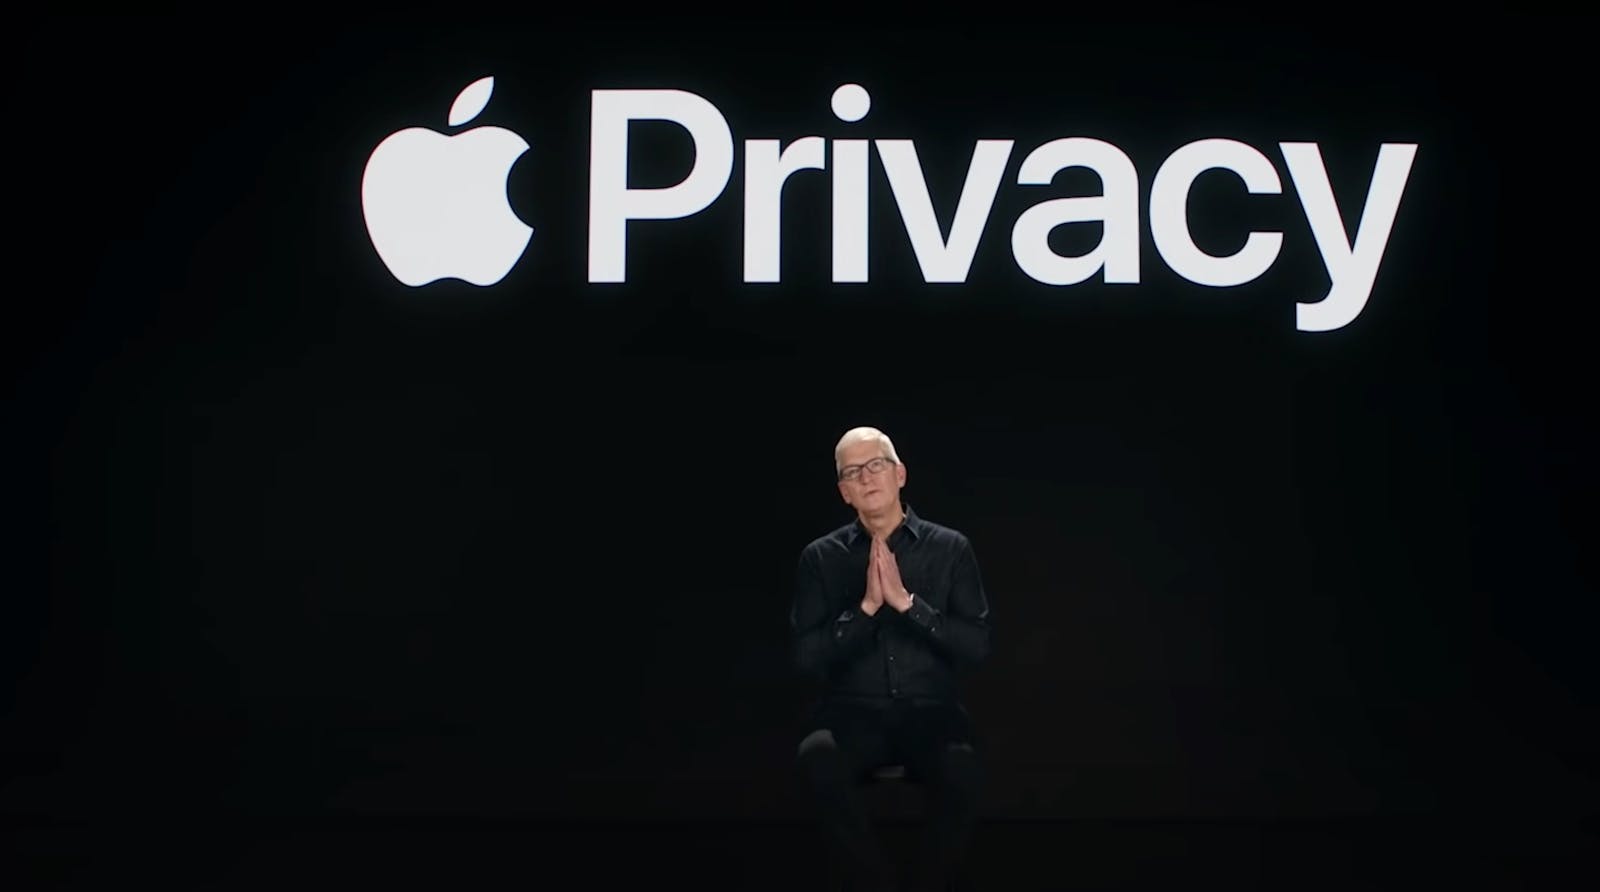 Apple CEO Tim Cook in a video promoting new privacy features in June 2021. Credit: Apple